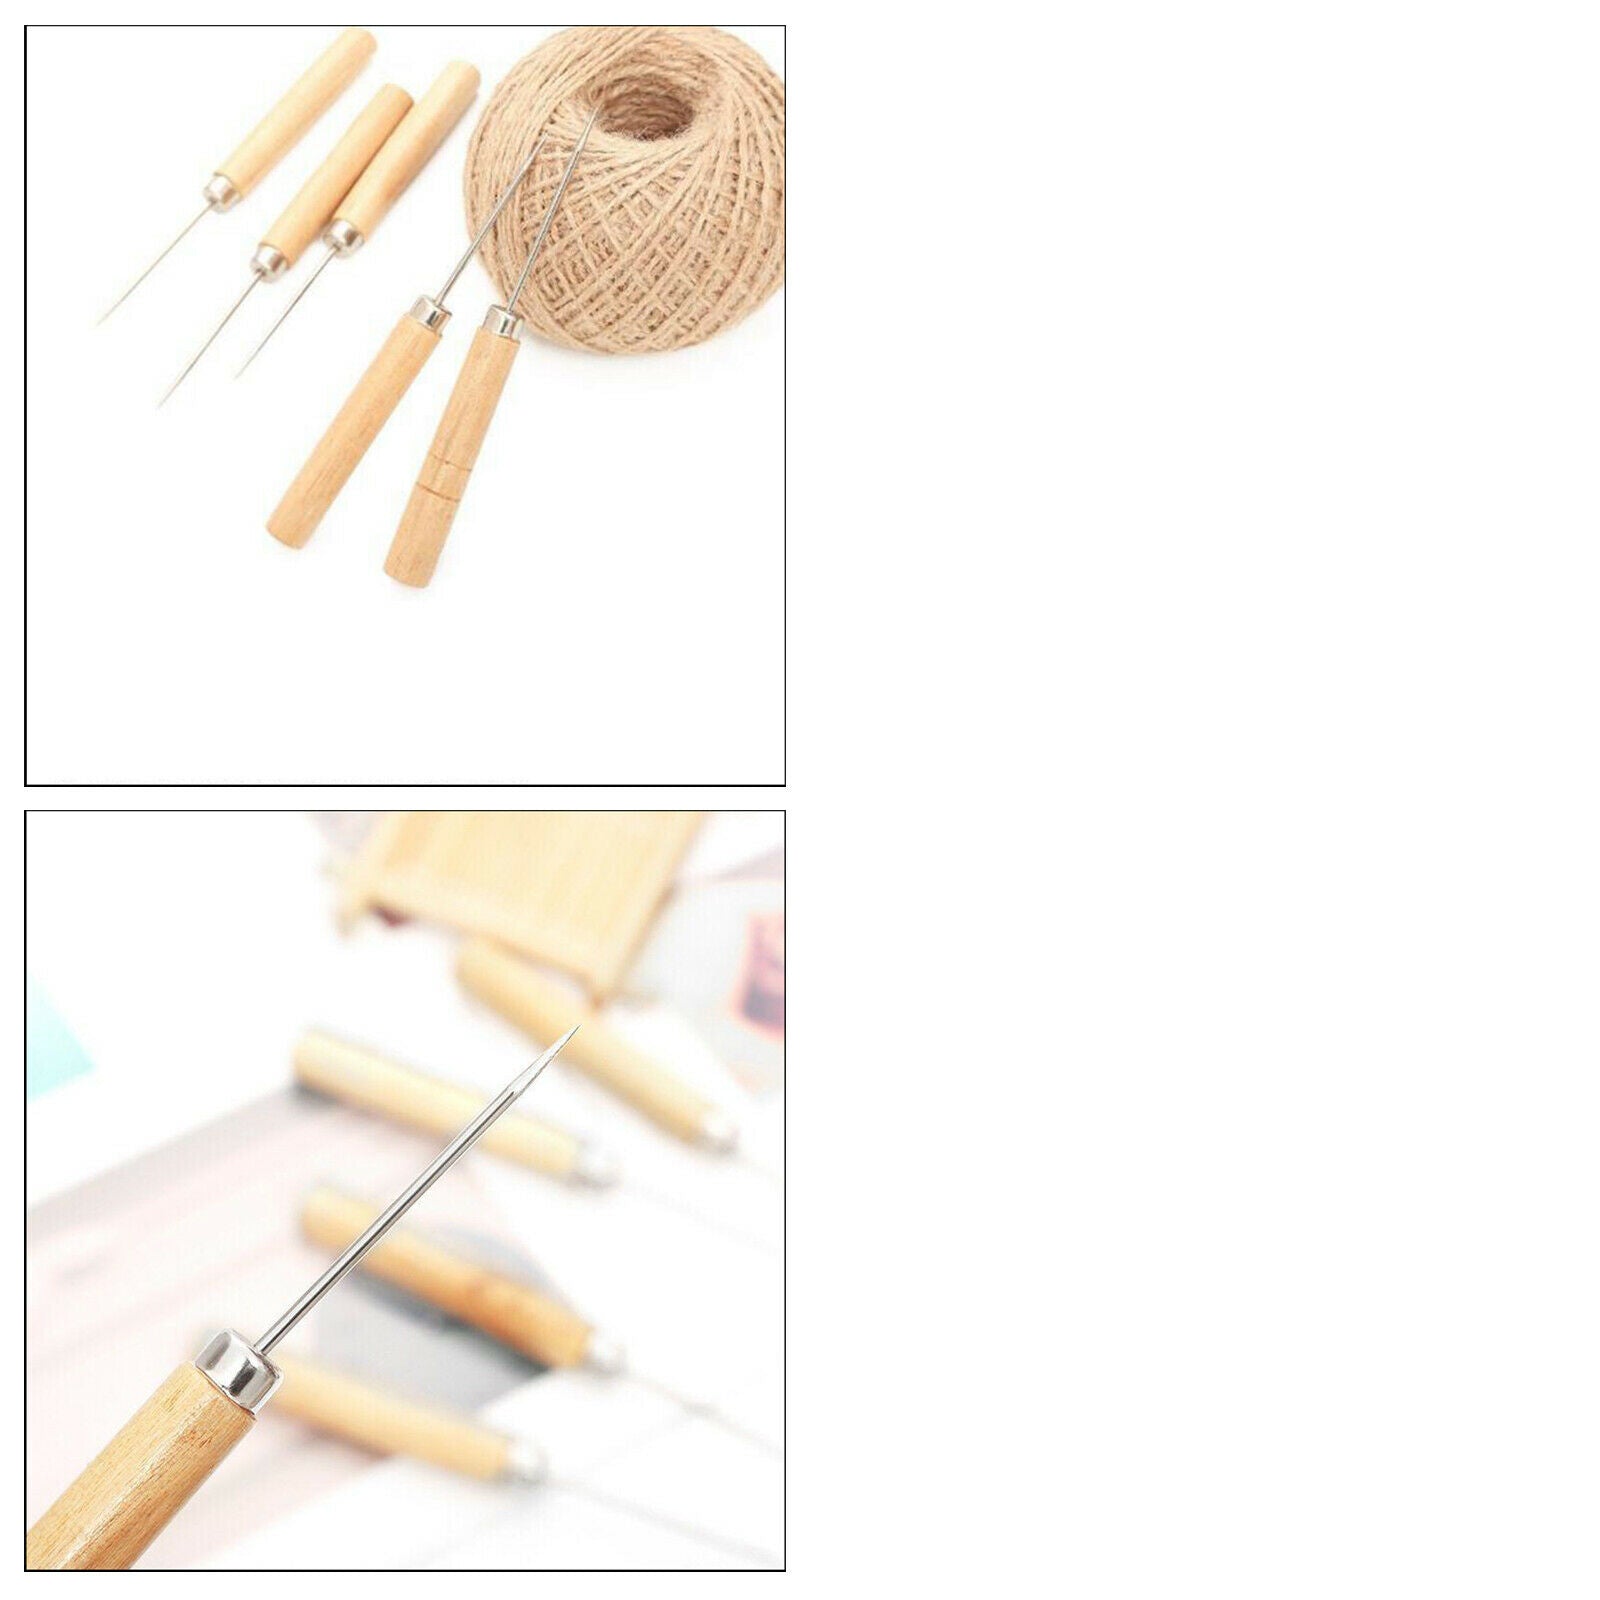 Bookbinding Tool, Sewing Awl Tool, Leather Sewing Needles for Leathercraft